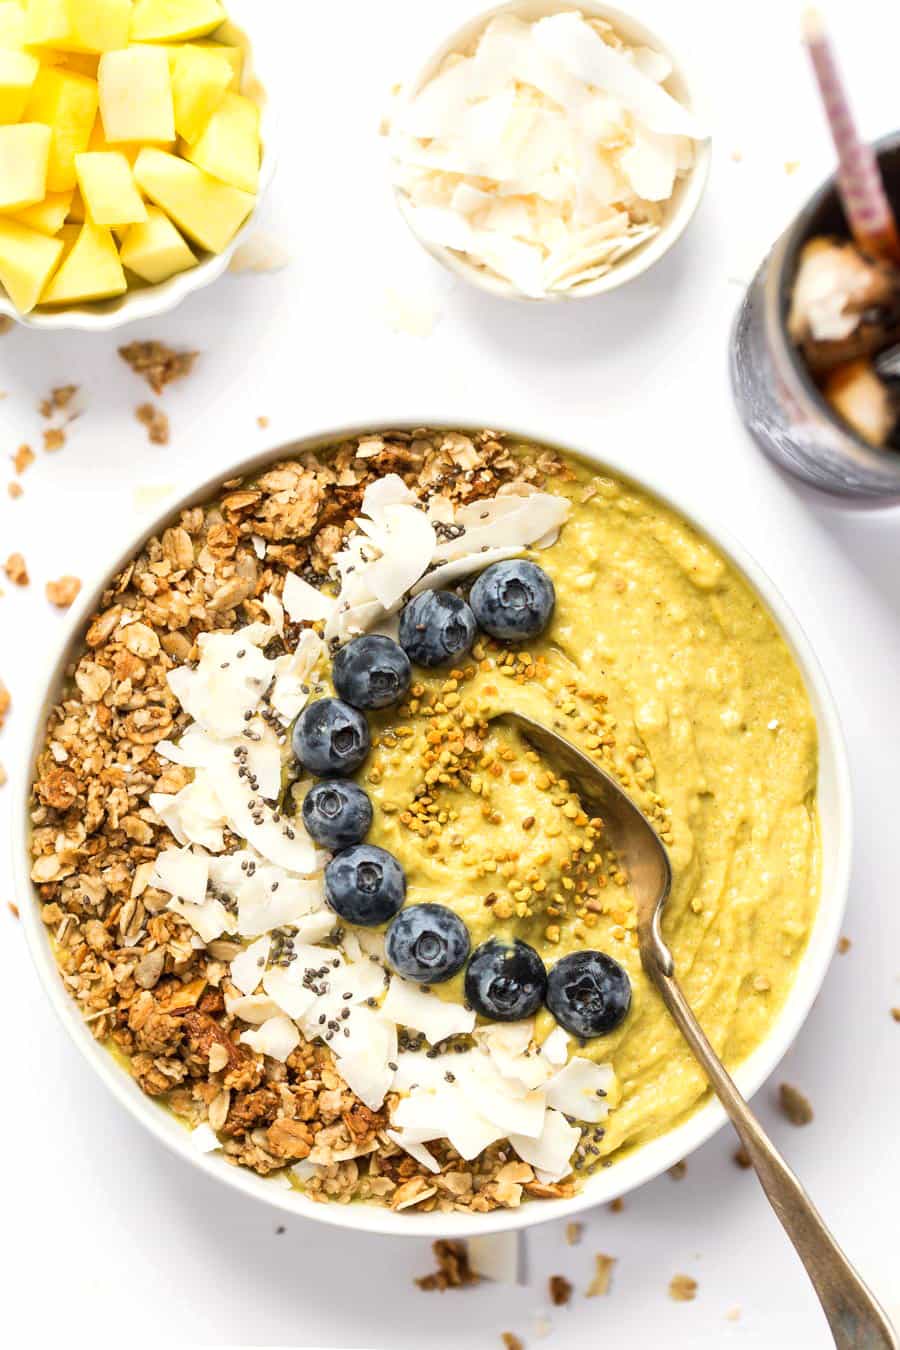 This energizing Mango Smoothie Bowl recipe is vegan and made with fruits, veggies and superfoods to give you fiber, vitamins and a natural healthy boost of energy at breakfast time! Easy to make! #smoothiebowl #mango #vegansmoothiebowl